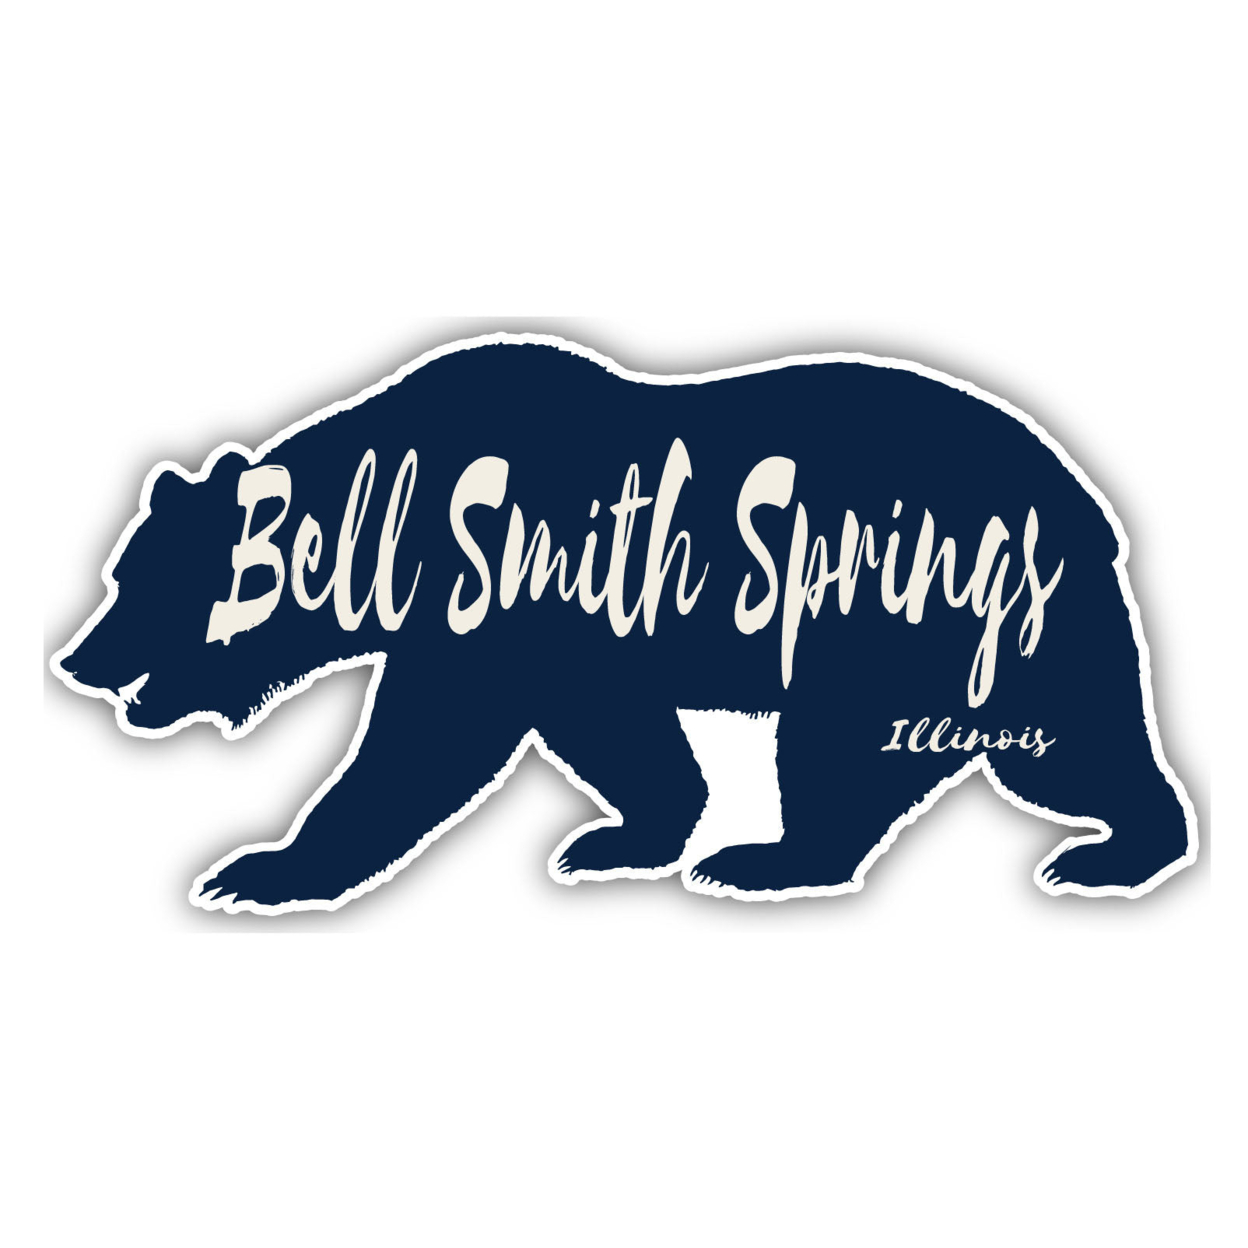 Bell Smith Springs Illinois Souvenir Decorative Stickers (Choose Theme And Size) - Single Unit, 4-Inch, Camp Life